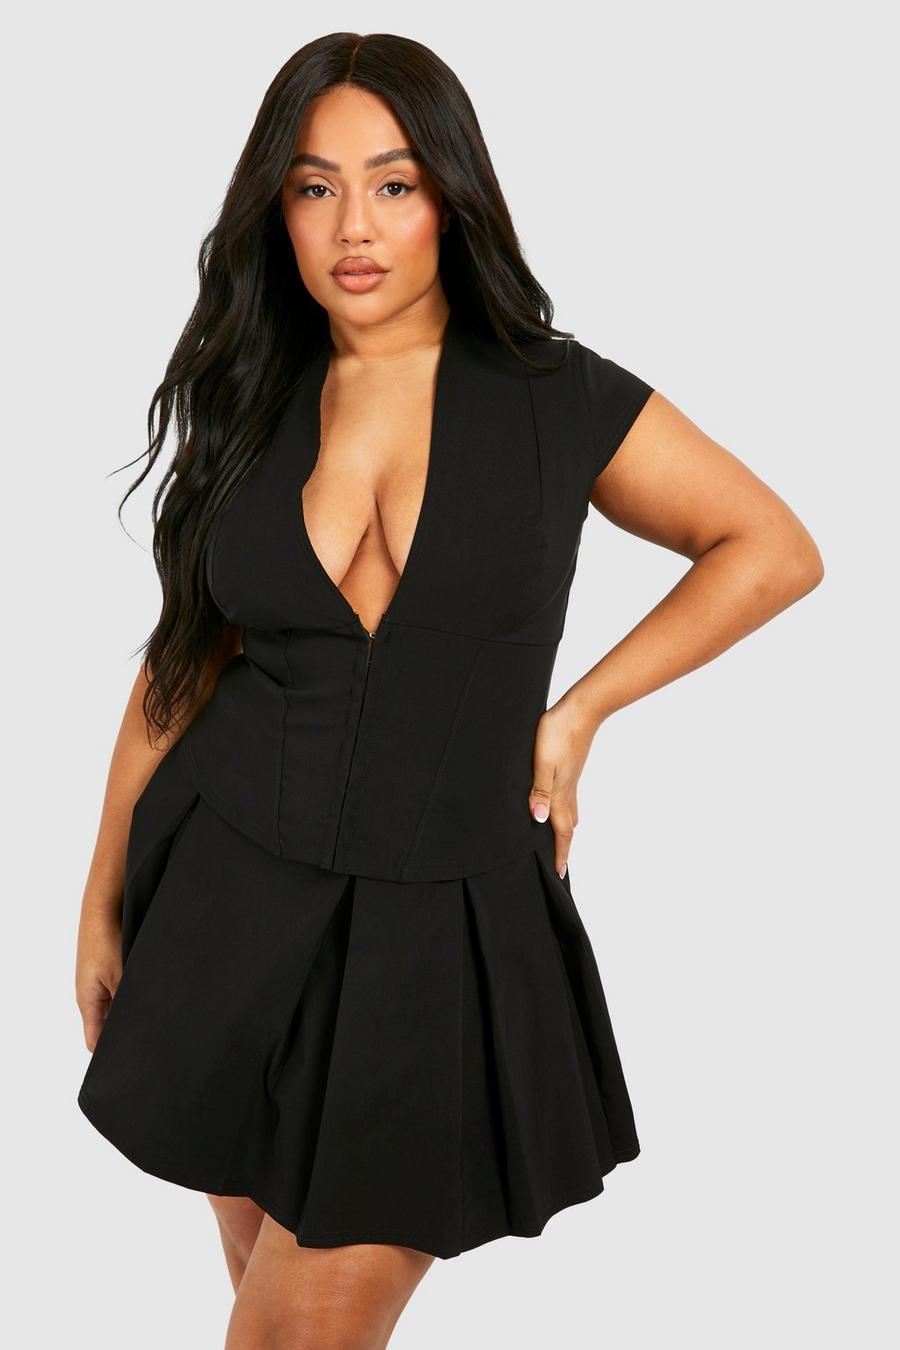 plus size clothing lot in All Categories in Canada - Kijiji Canada